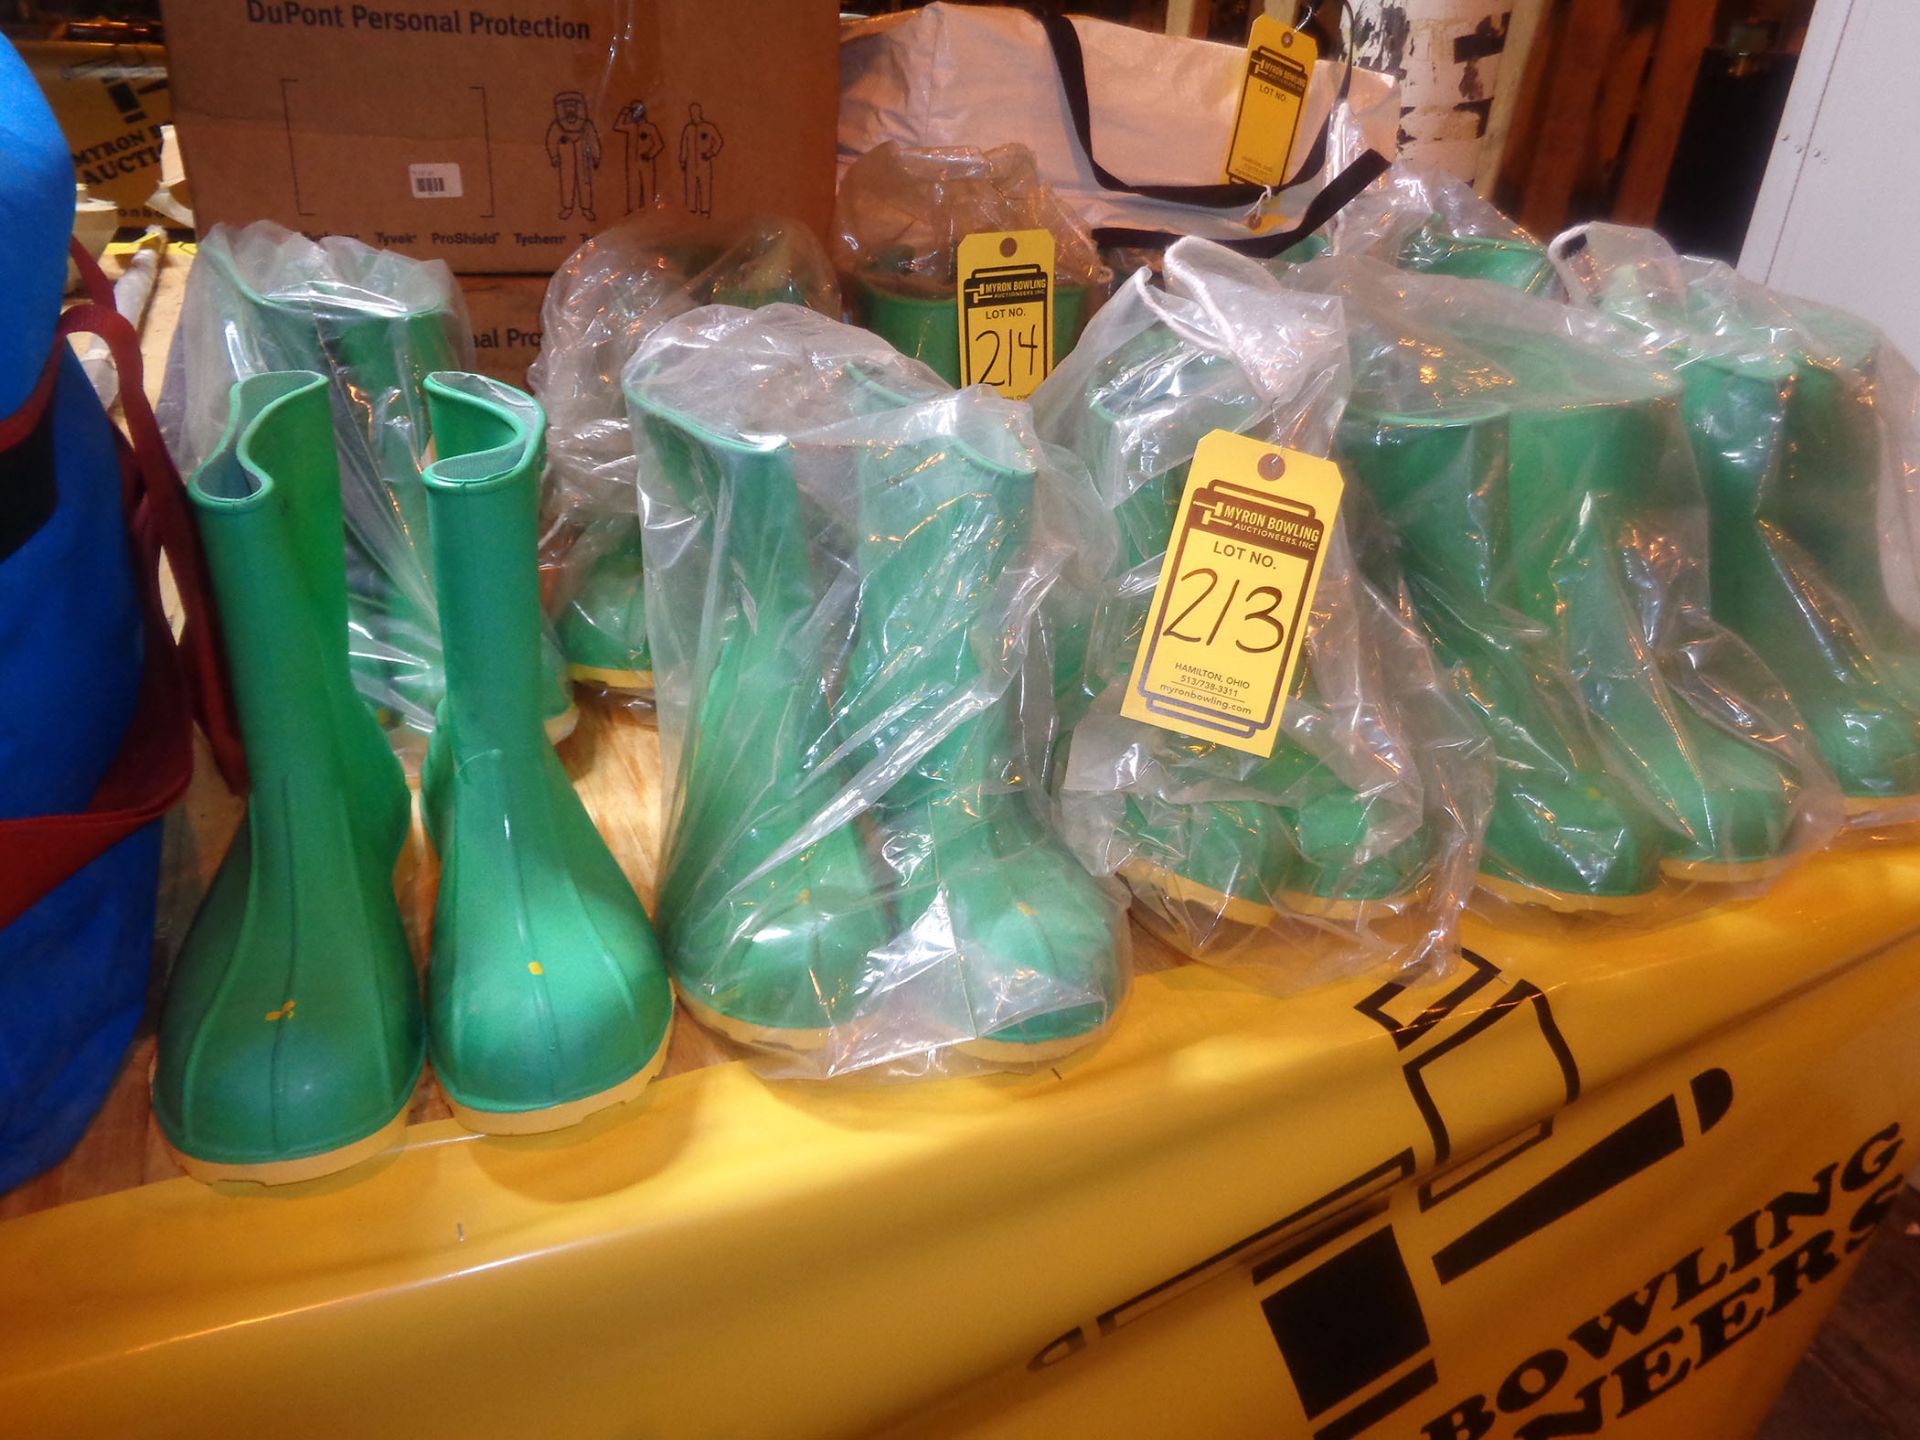 5 PAIRS OF ONGUARD HAZMAT RUBBER BOOTS - NEW